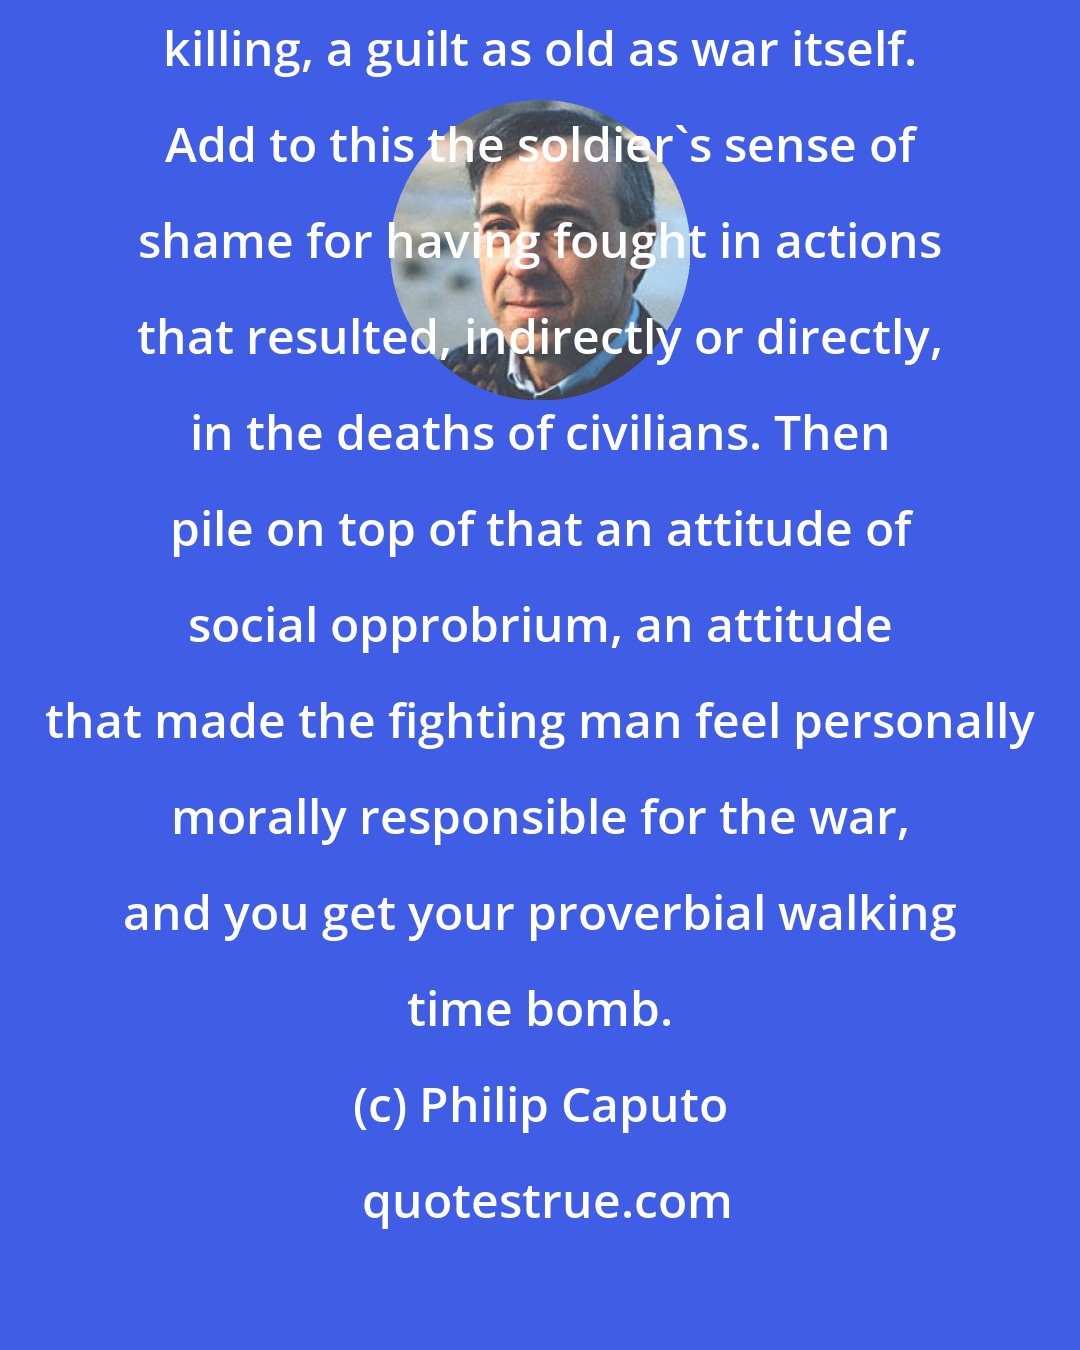 Philip Caputo: There is the guilt all soldiers feel for having broken the taboo against killing, a guilt as old as war itself. Add to this the soldier's sense of shame for having fought in actions that resulted, indirectly or directly, in the deaths of civilians. Then pile on top of that an attitude of social opprobrium, an attitude that made the fighting man feel personally morally responsible for the war, and you get your proverbial walking time bomb.